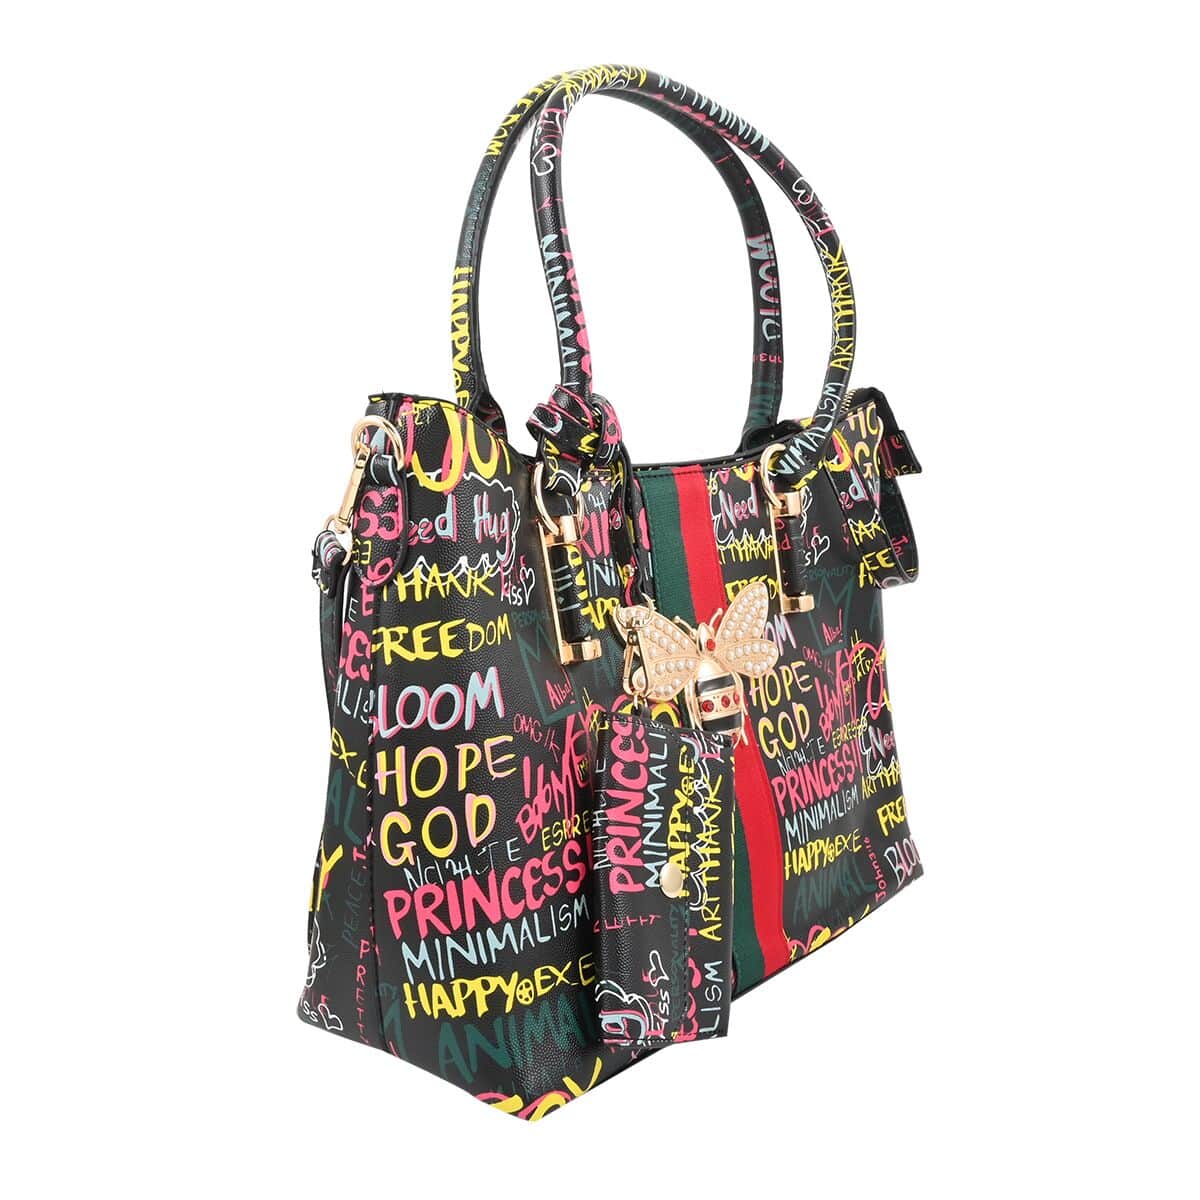 TLV 4pc Black & Multi Color Vegan Leather Tote Bag, Clutch, Cosmetic Bag and Coin Purse (14.5"x10"x5") image number 4